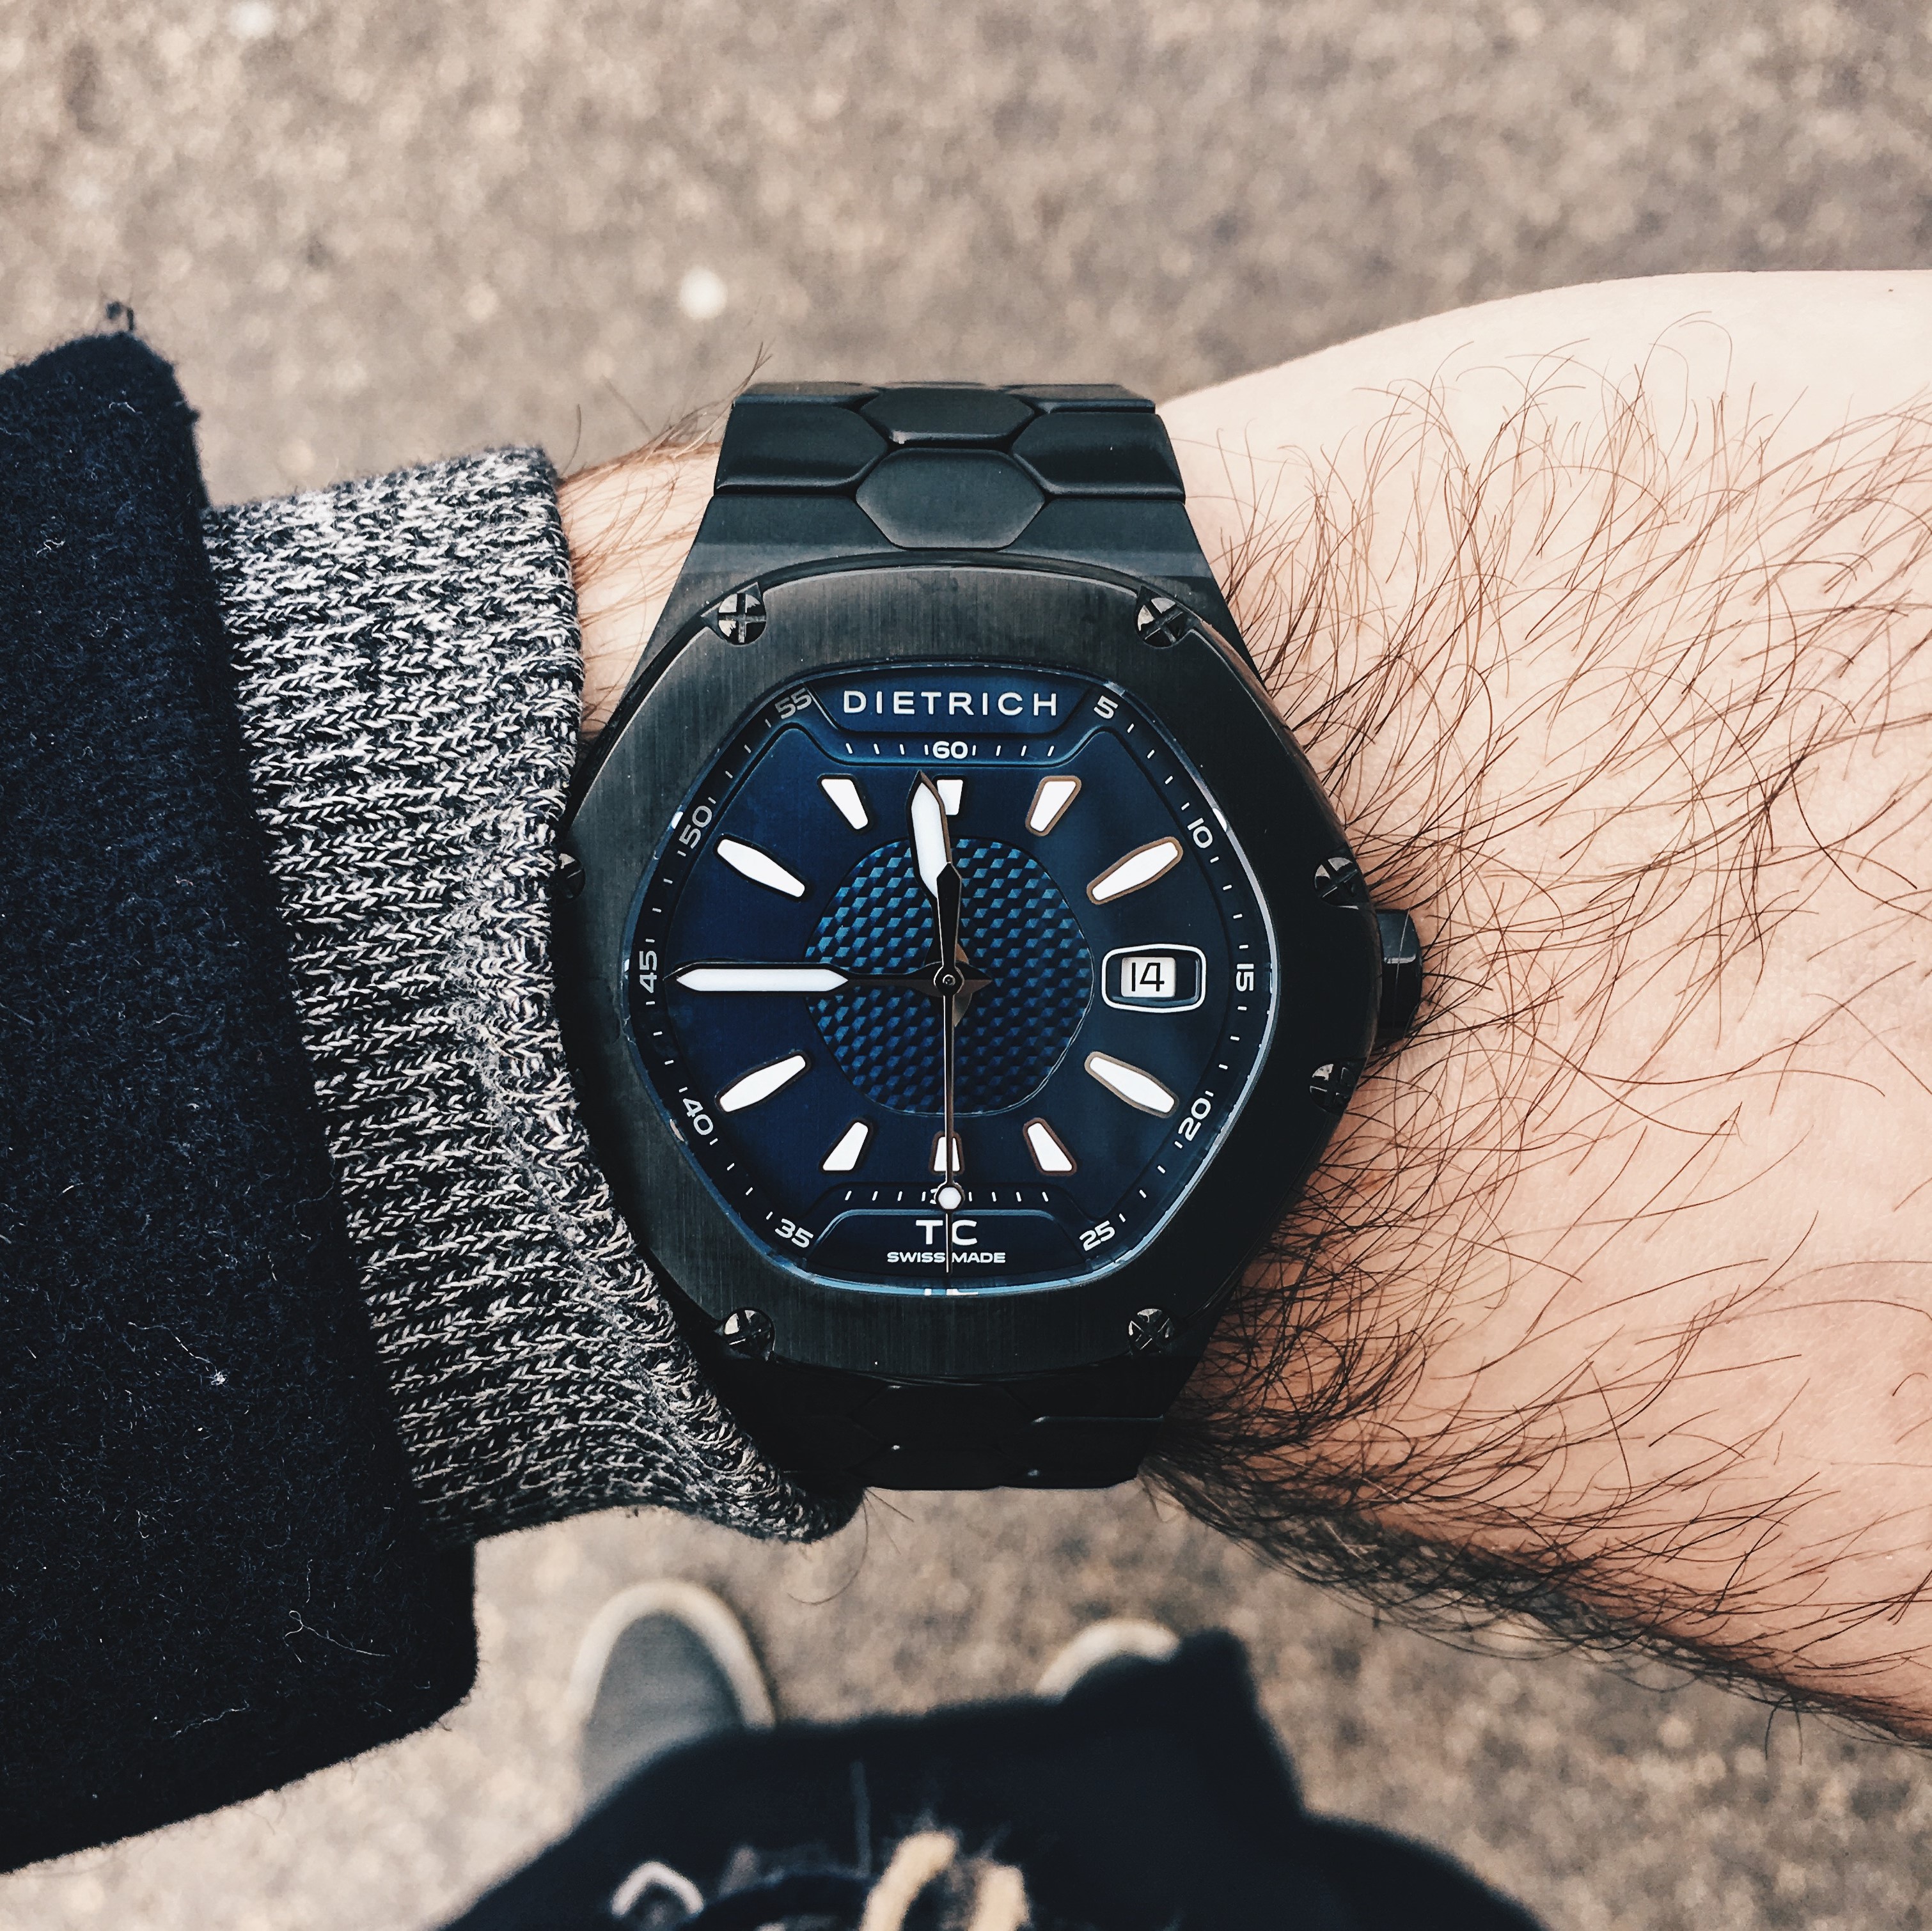 Dietrich TC PVD Blue (Review) + Interview with founder Emmanuel